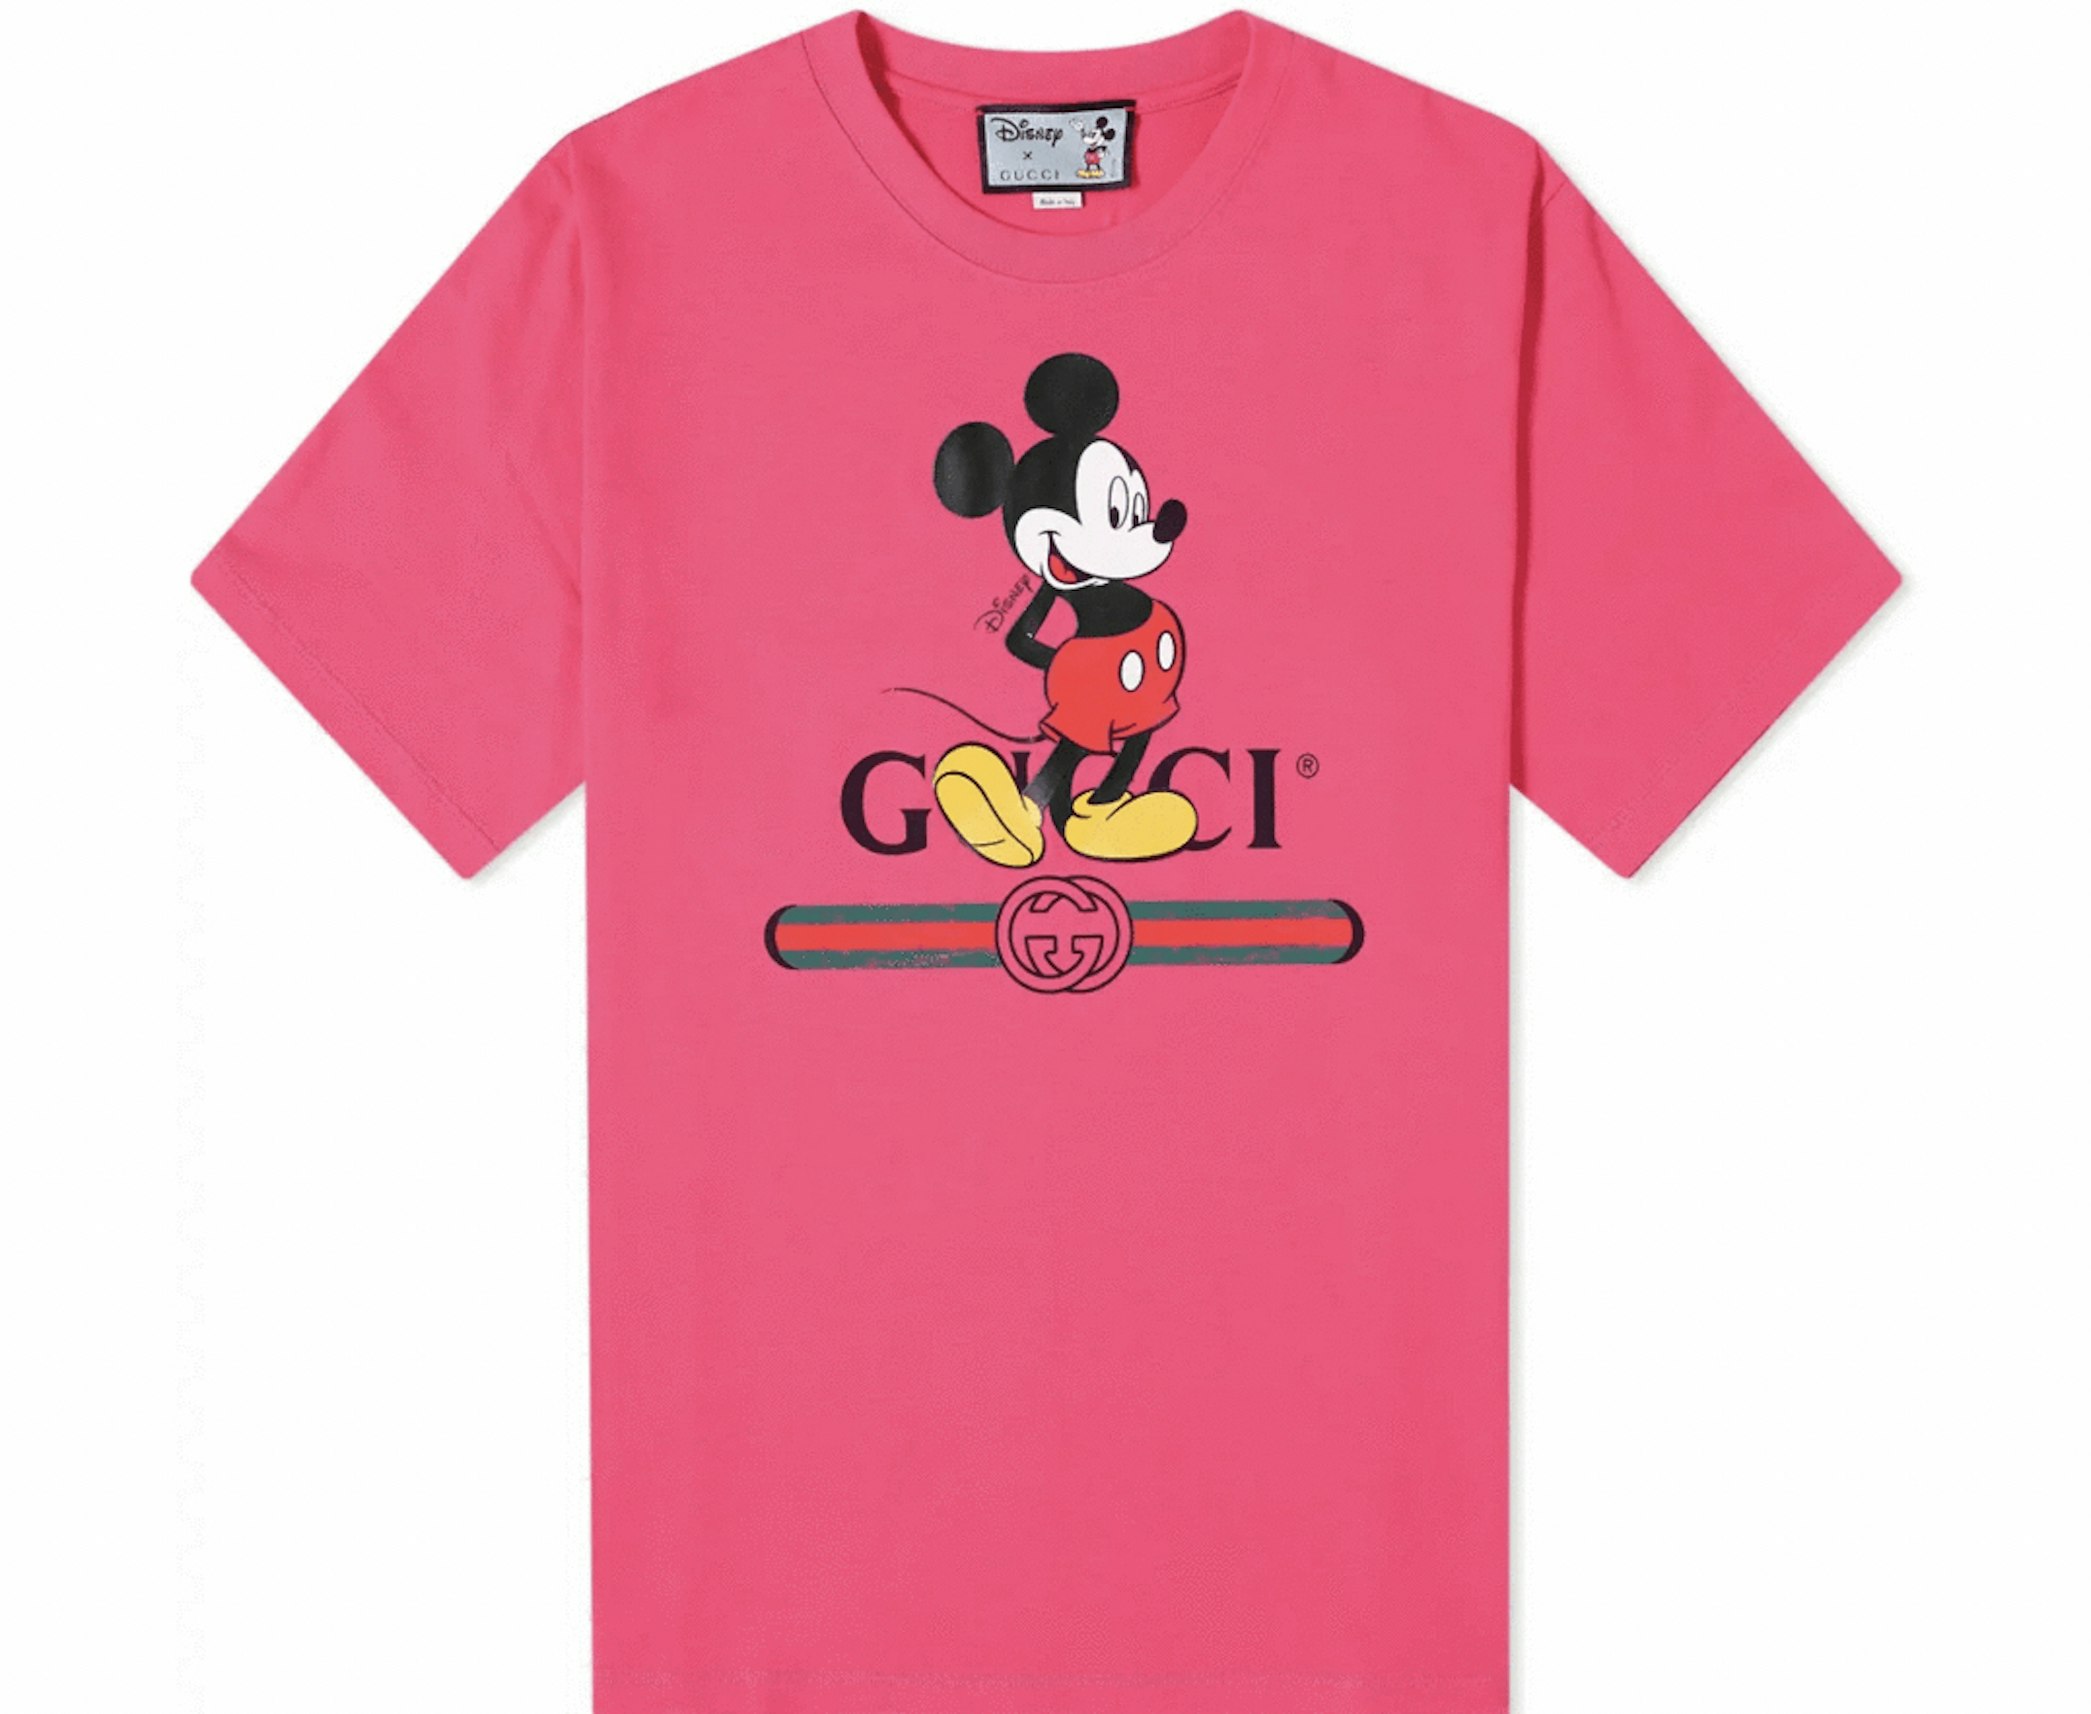 Gucci x Disney Mickey Mouse Pink Men's -